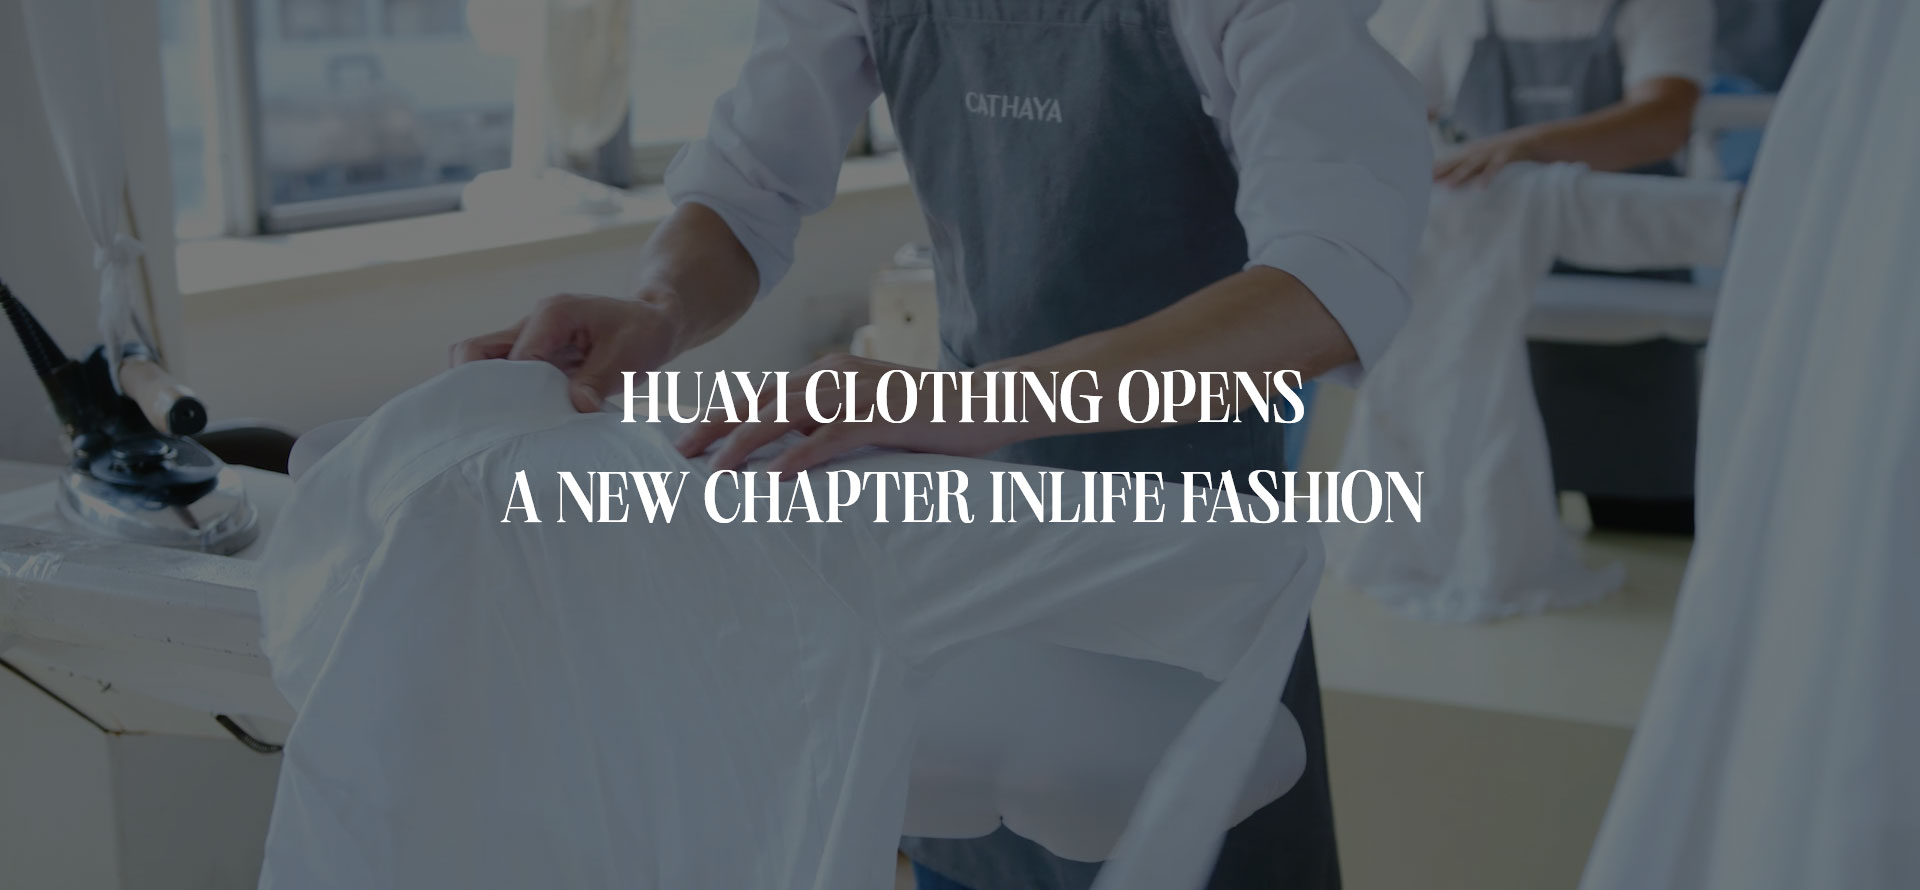 HUAYI CI OTHING OPENS<br> A NEW CHAPTER iNLIFE FASHION